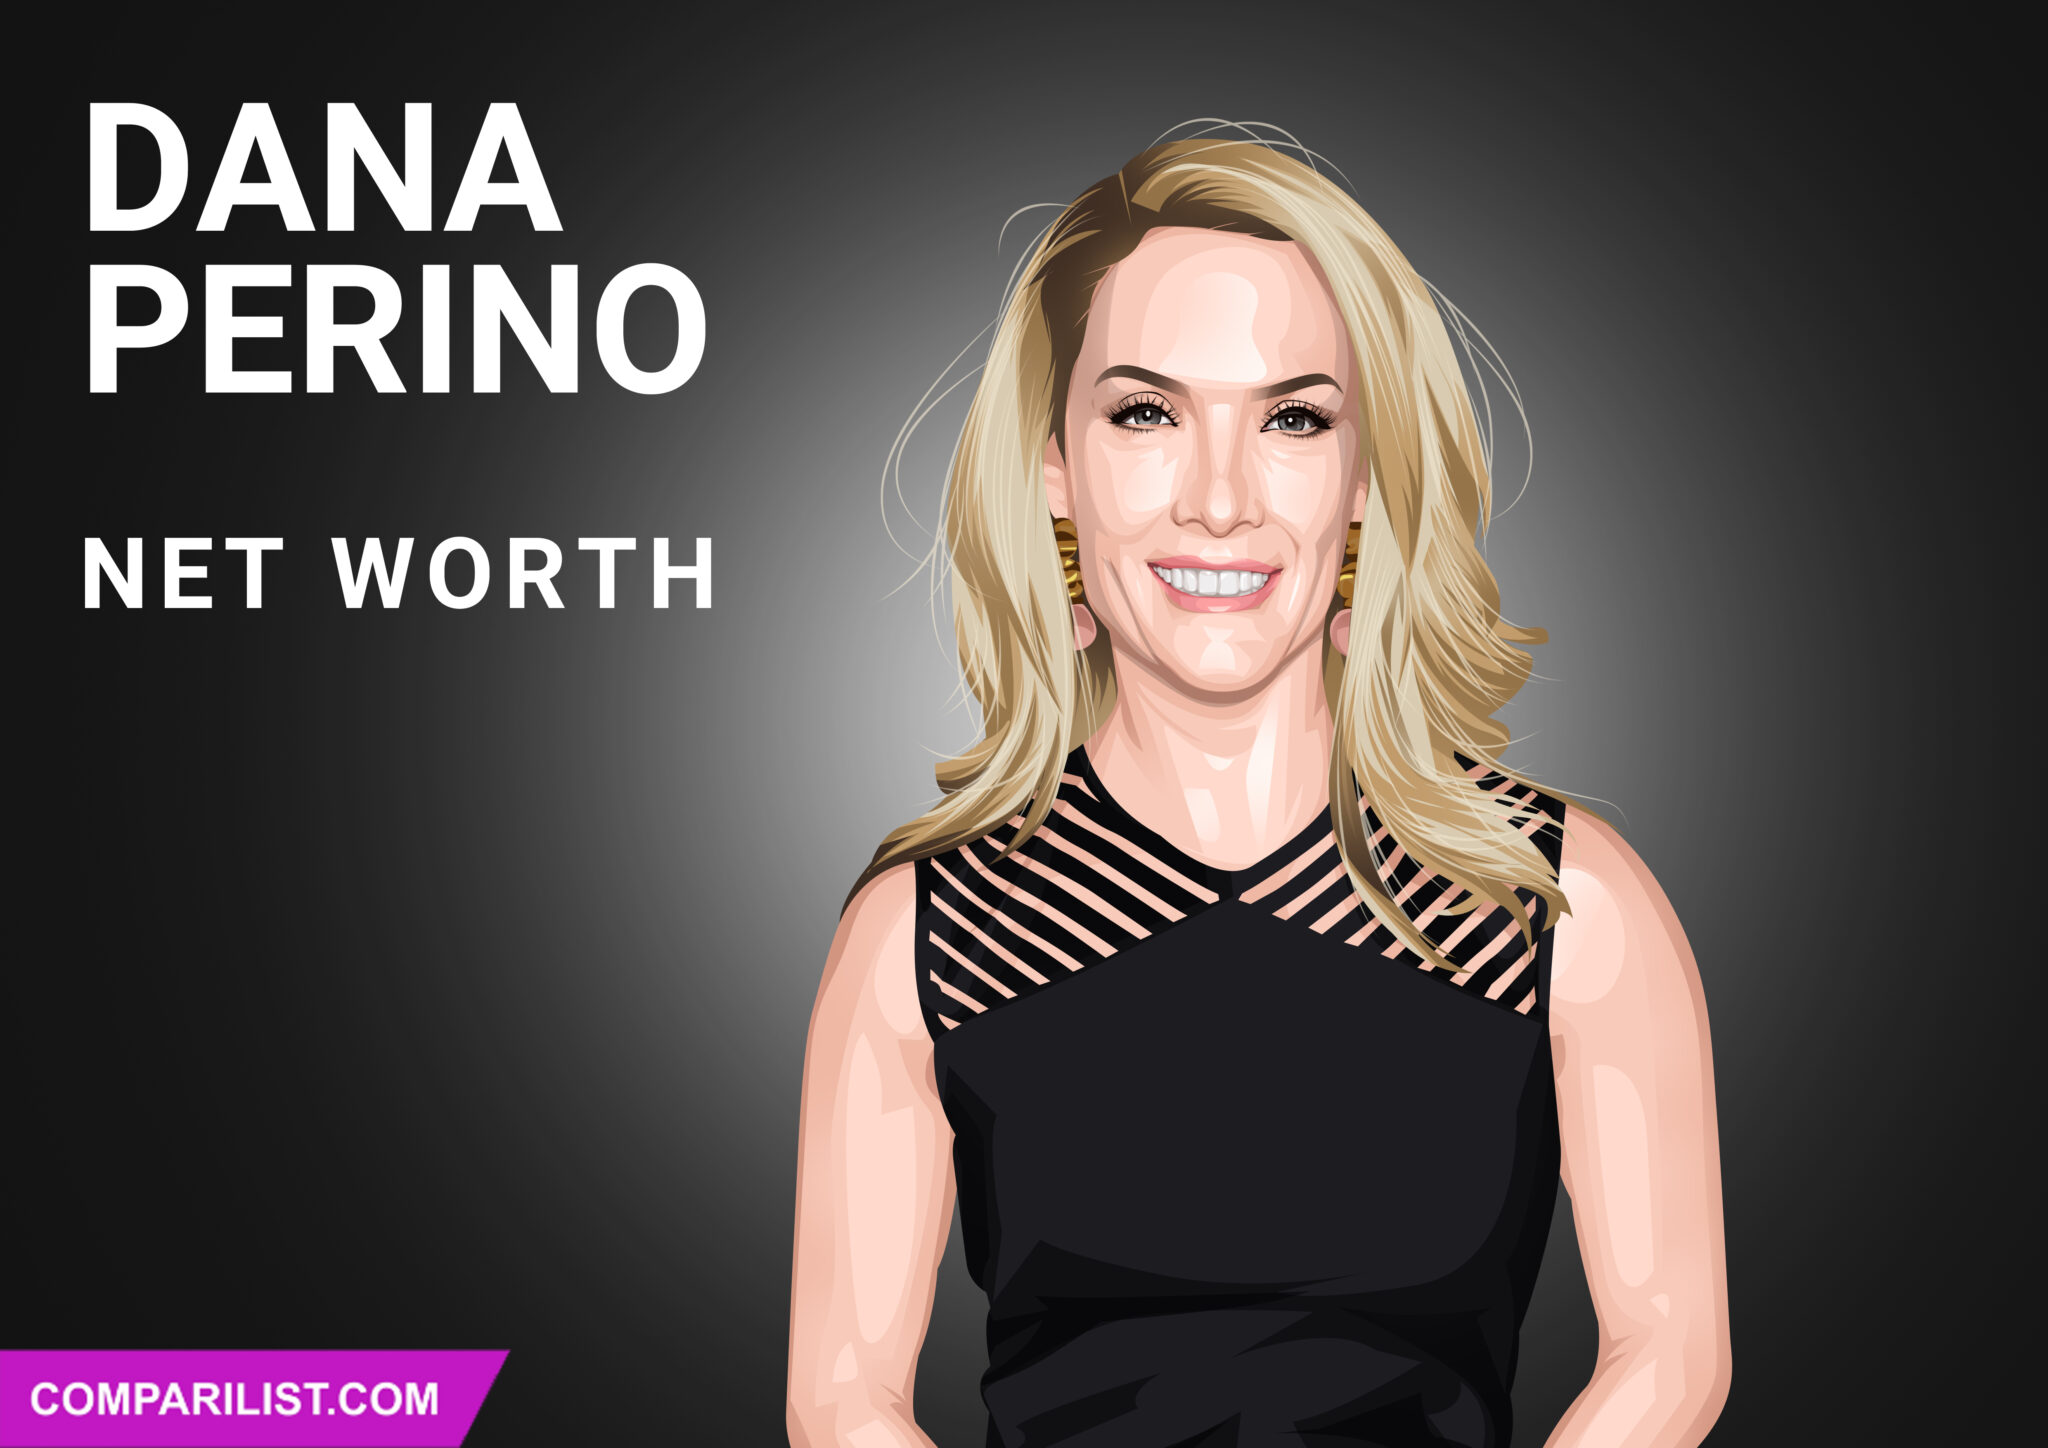 Dana Perino used her brains and a lot of hard work to land a job at the Whi...